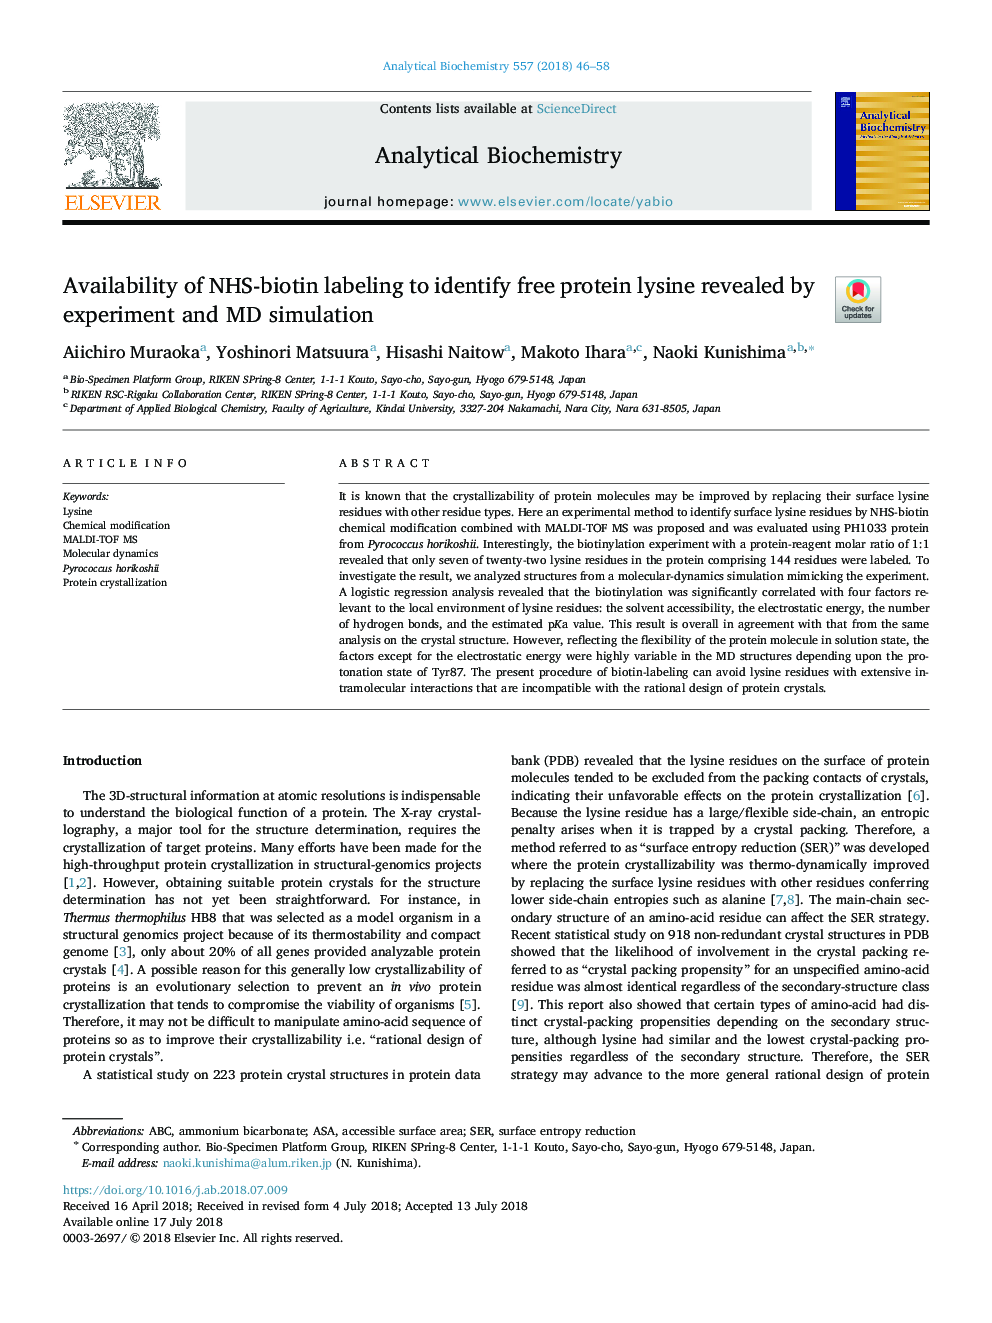 Availability of NHS-biotin labeling to identify free protein lysine revealed by experiment and MD simulation